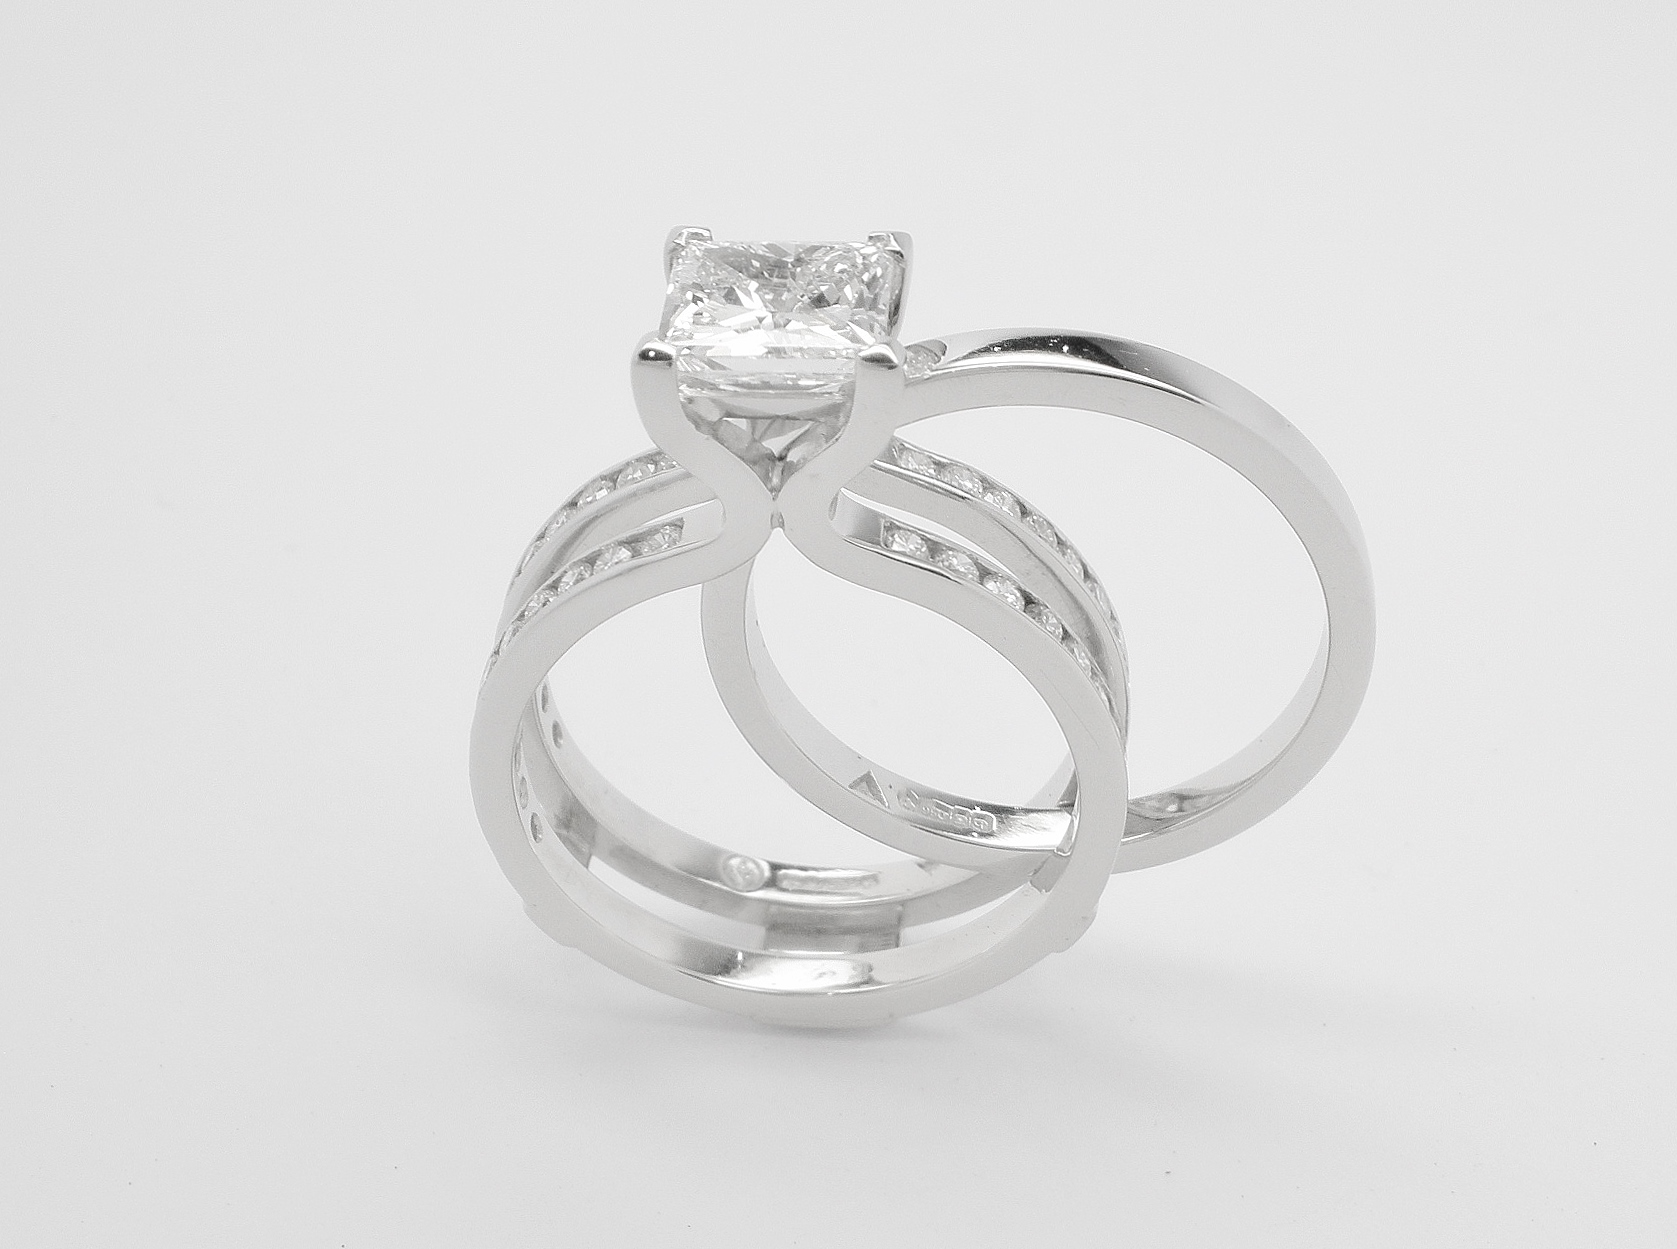 Single stone 1.19ct.'D' colour princess cut diamond 'Embrace' ring set in platinum. The twin shank allows for the insertion of a plain platinum wedding ring.